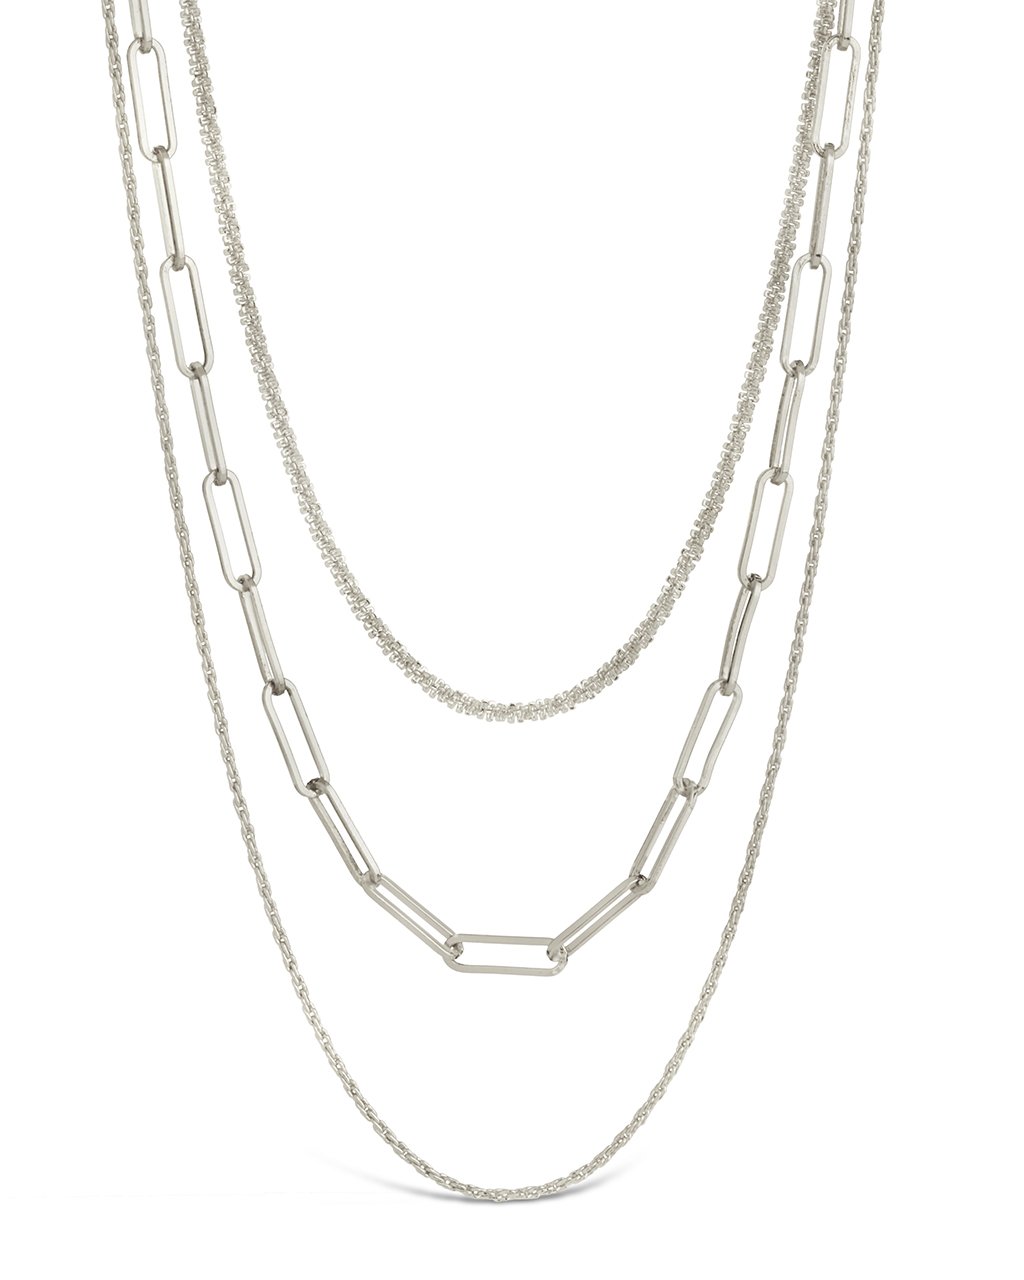 Kori Triple Layered Necklace Necklace Sterling Forever Silver 